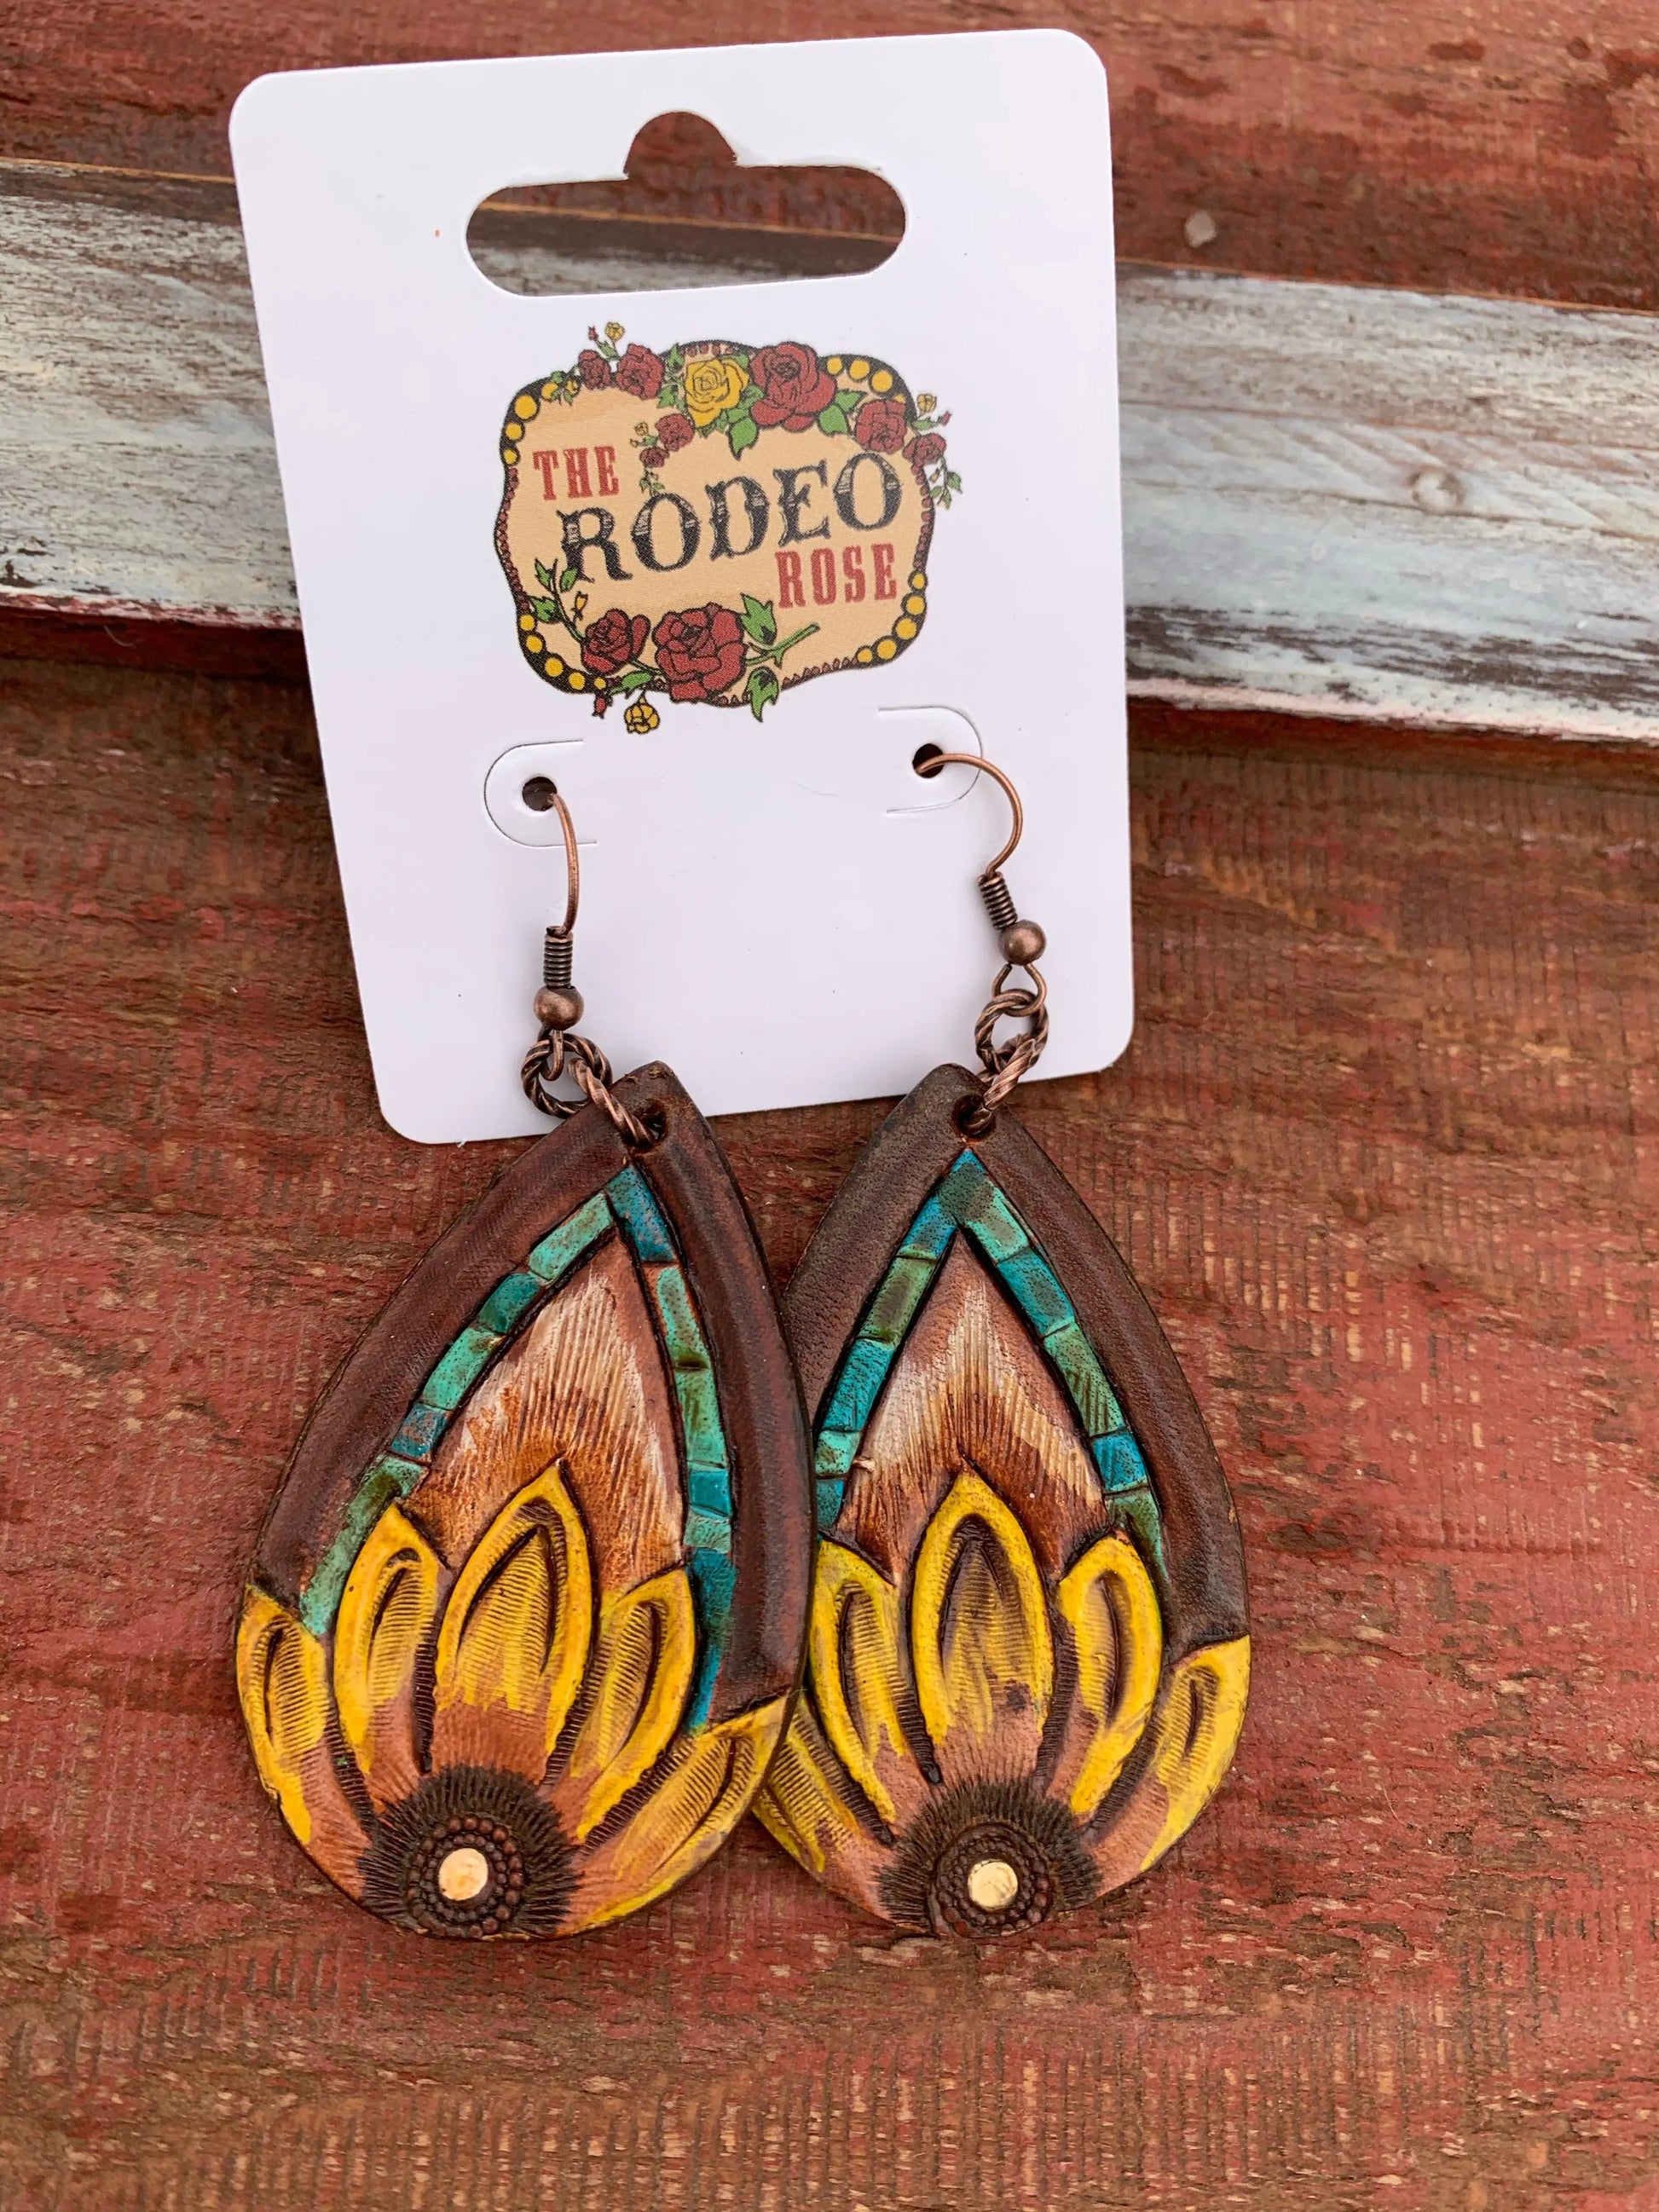 The Tad Hand tooled Leather Earring with Turquoise Border The Rodeo Rose